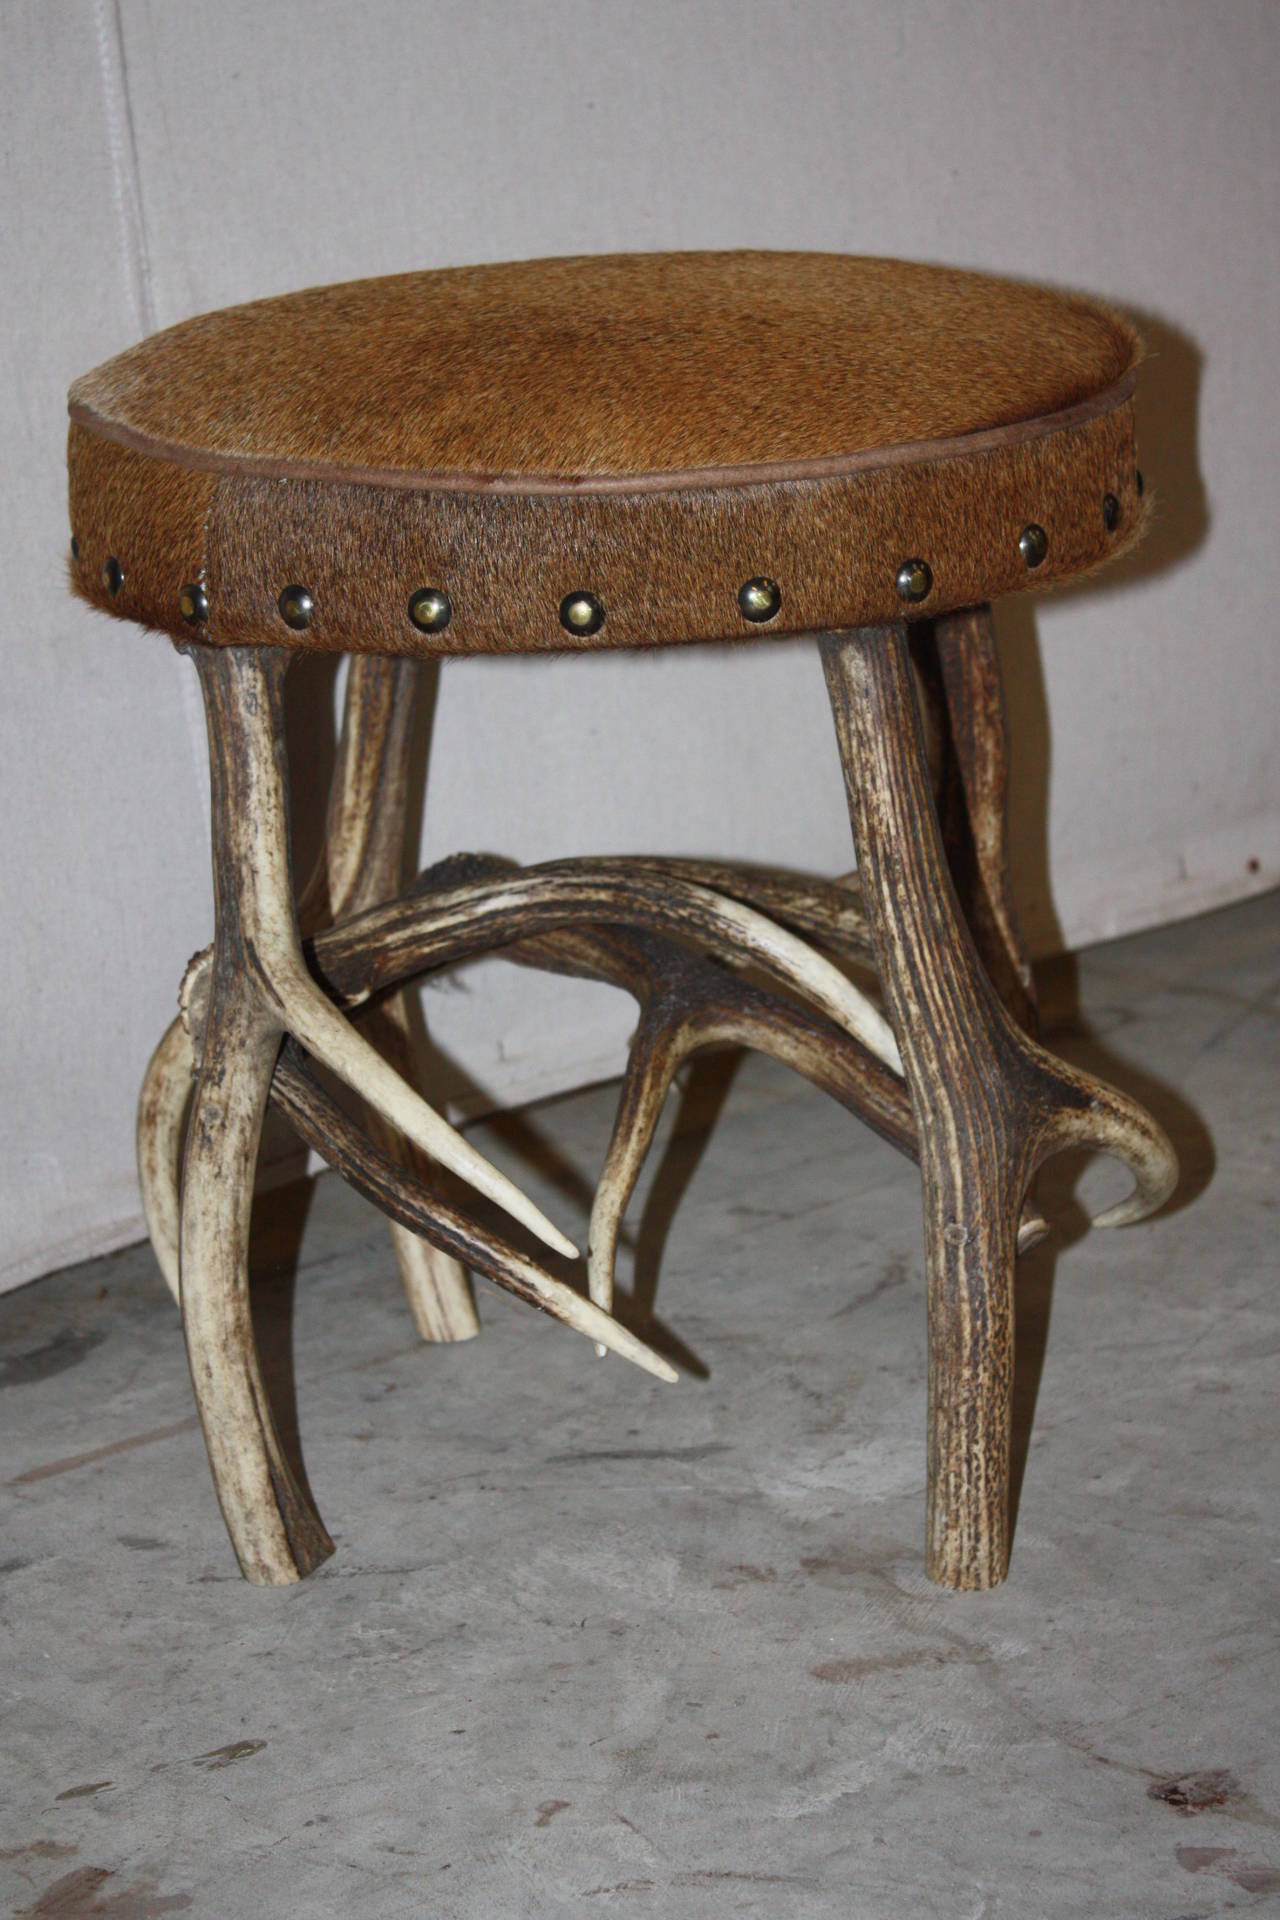 This is a very nice looking stag horn based stool that is upholstered with a hair on hide.  The stool is very well put together.  I purchased it in England.  I actually have 4 different stools with similar bases but each upholstered with hides of